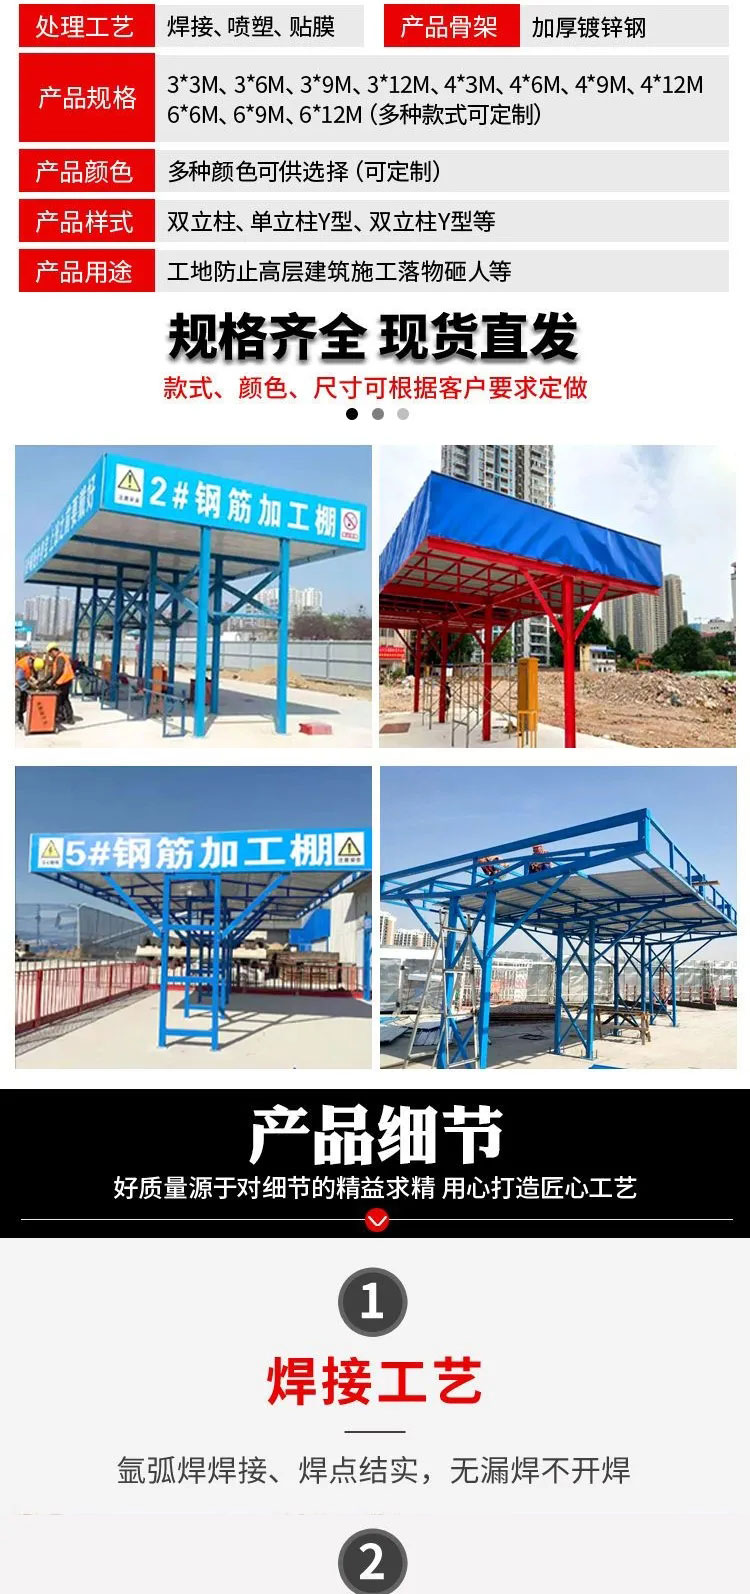 Standardized steel bar processing shed for construction sites, protective shed for assembled work safety distribution box, protective shed